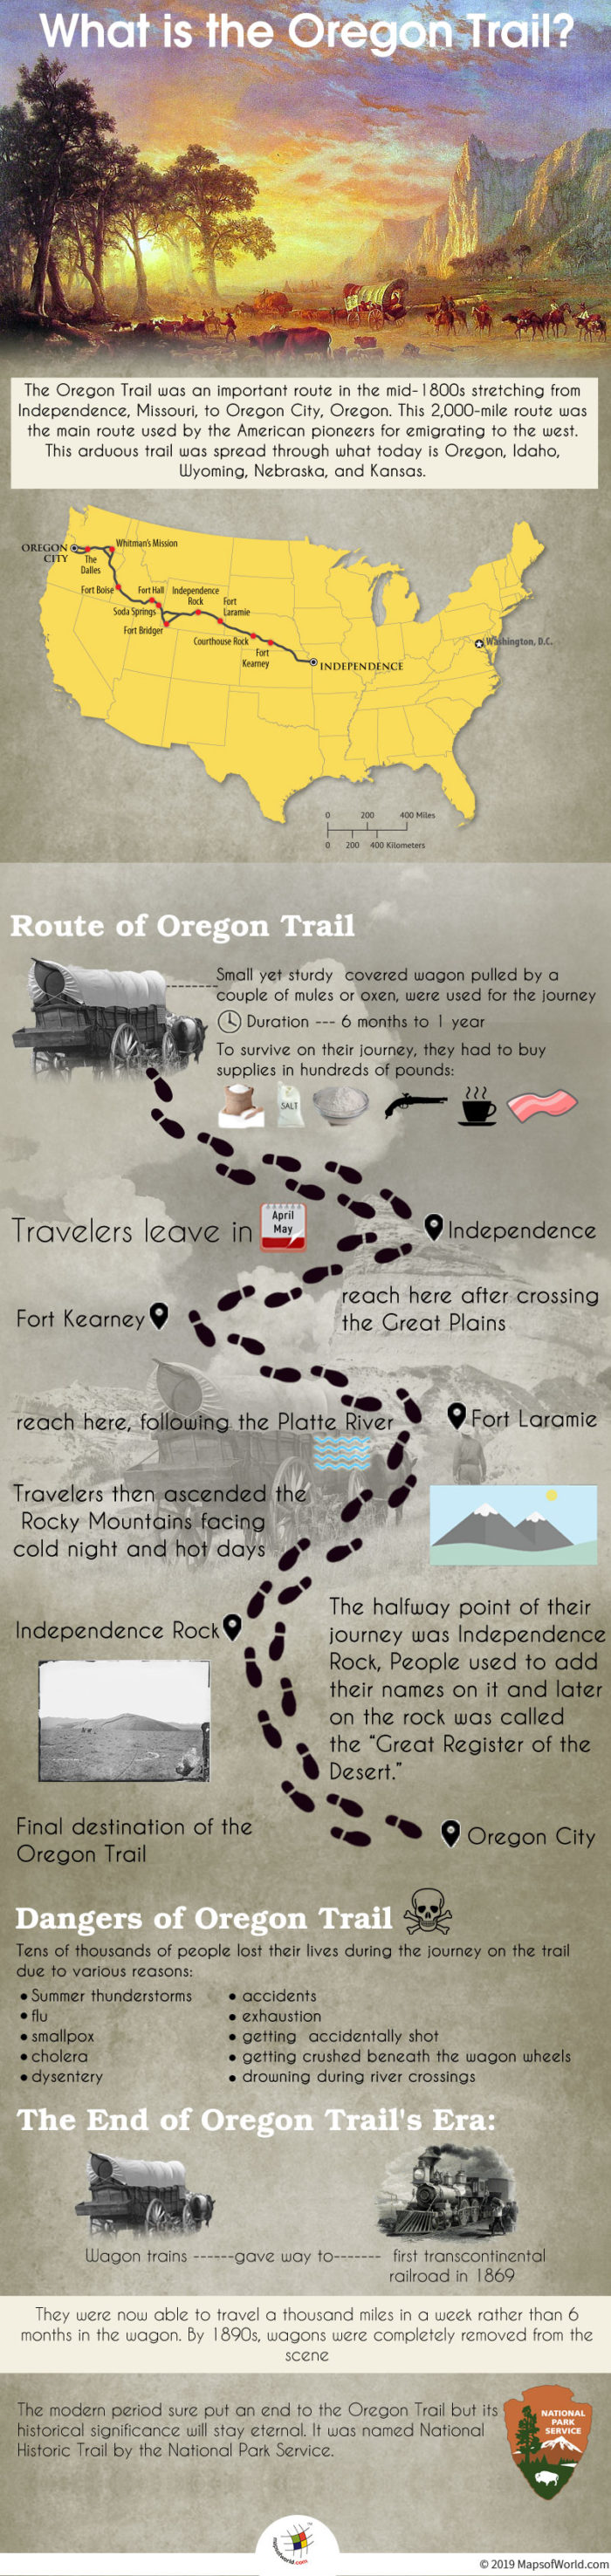 Infographic Giving Details About The Oregon Trail